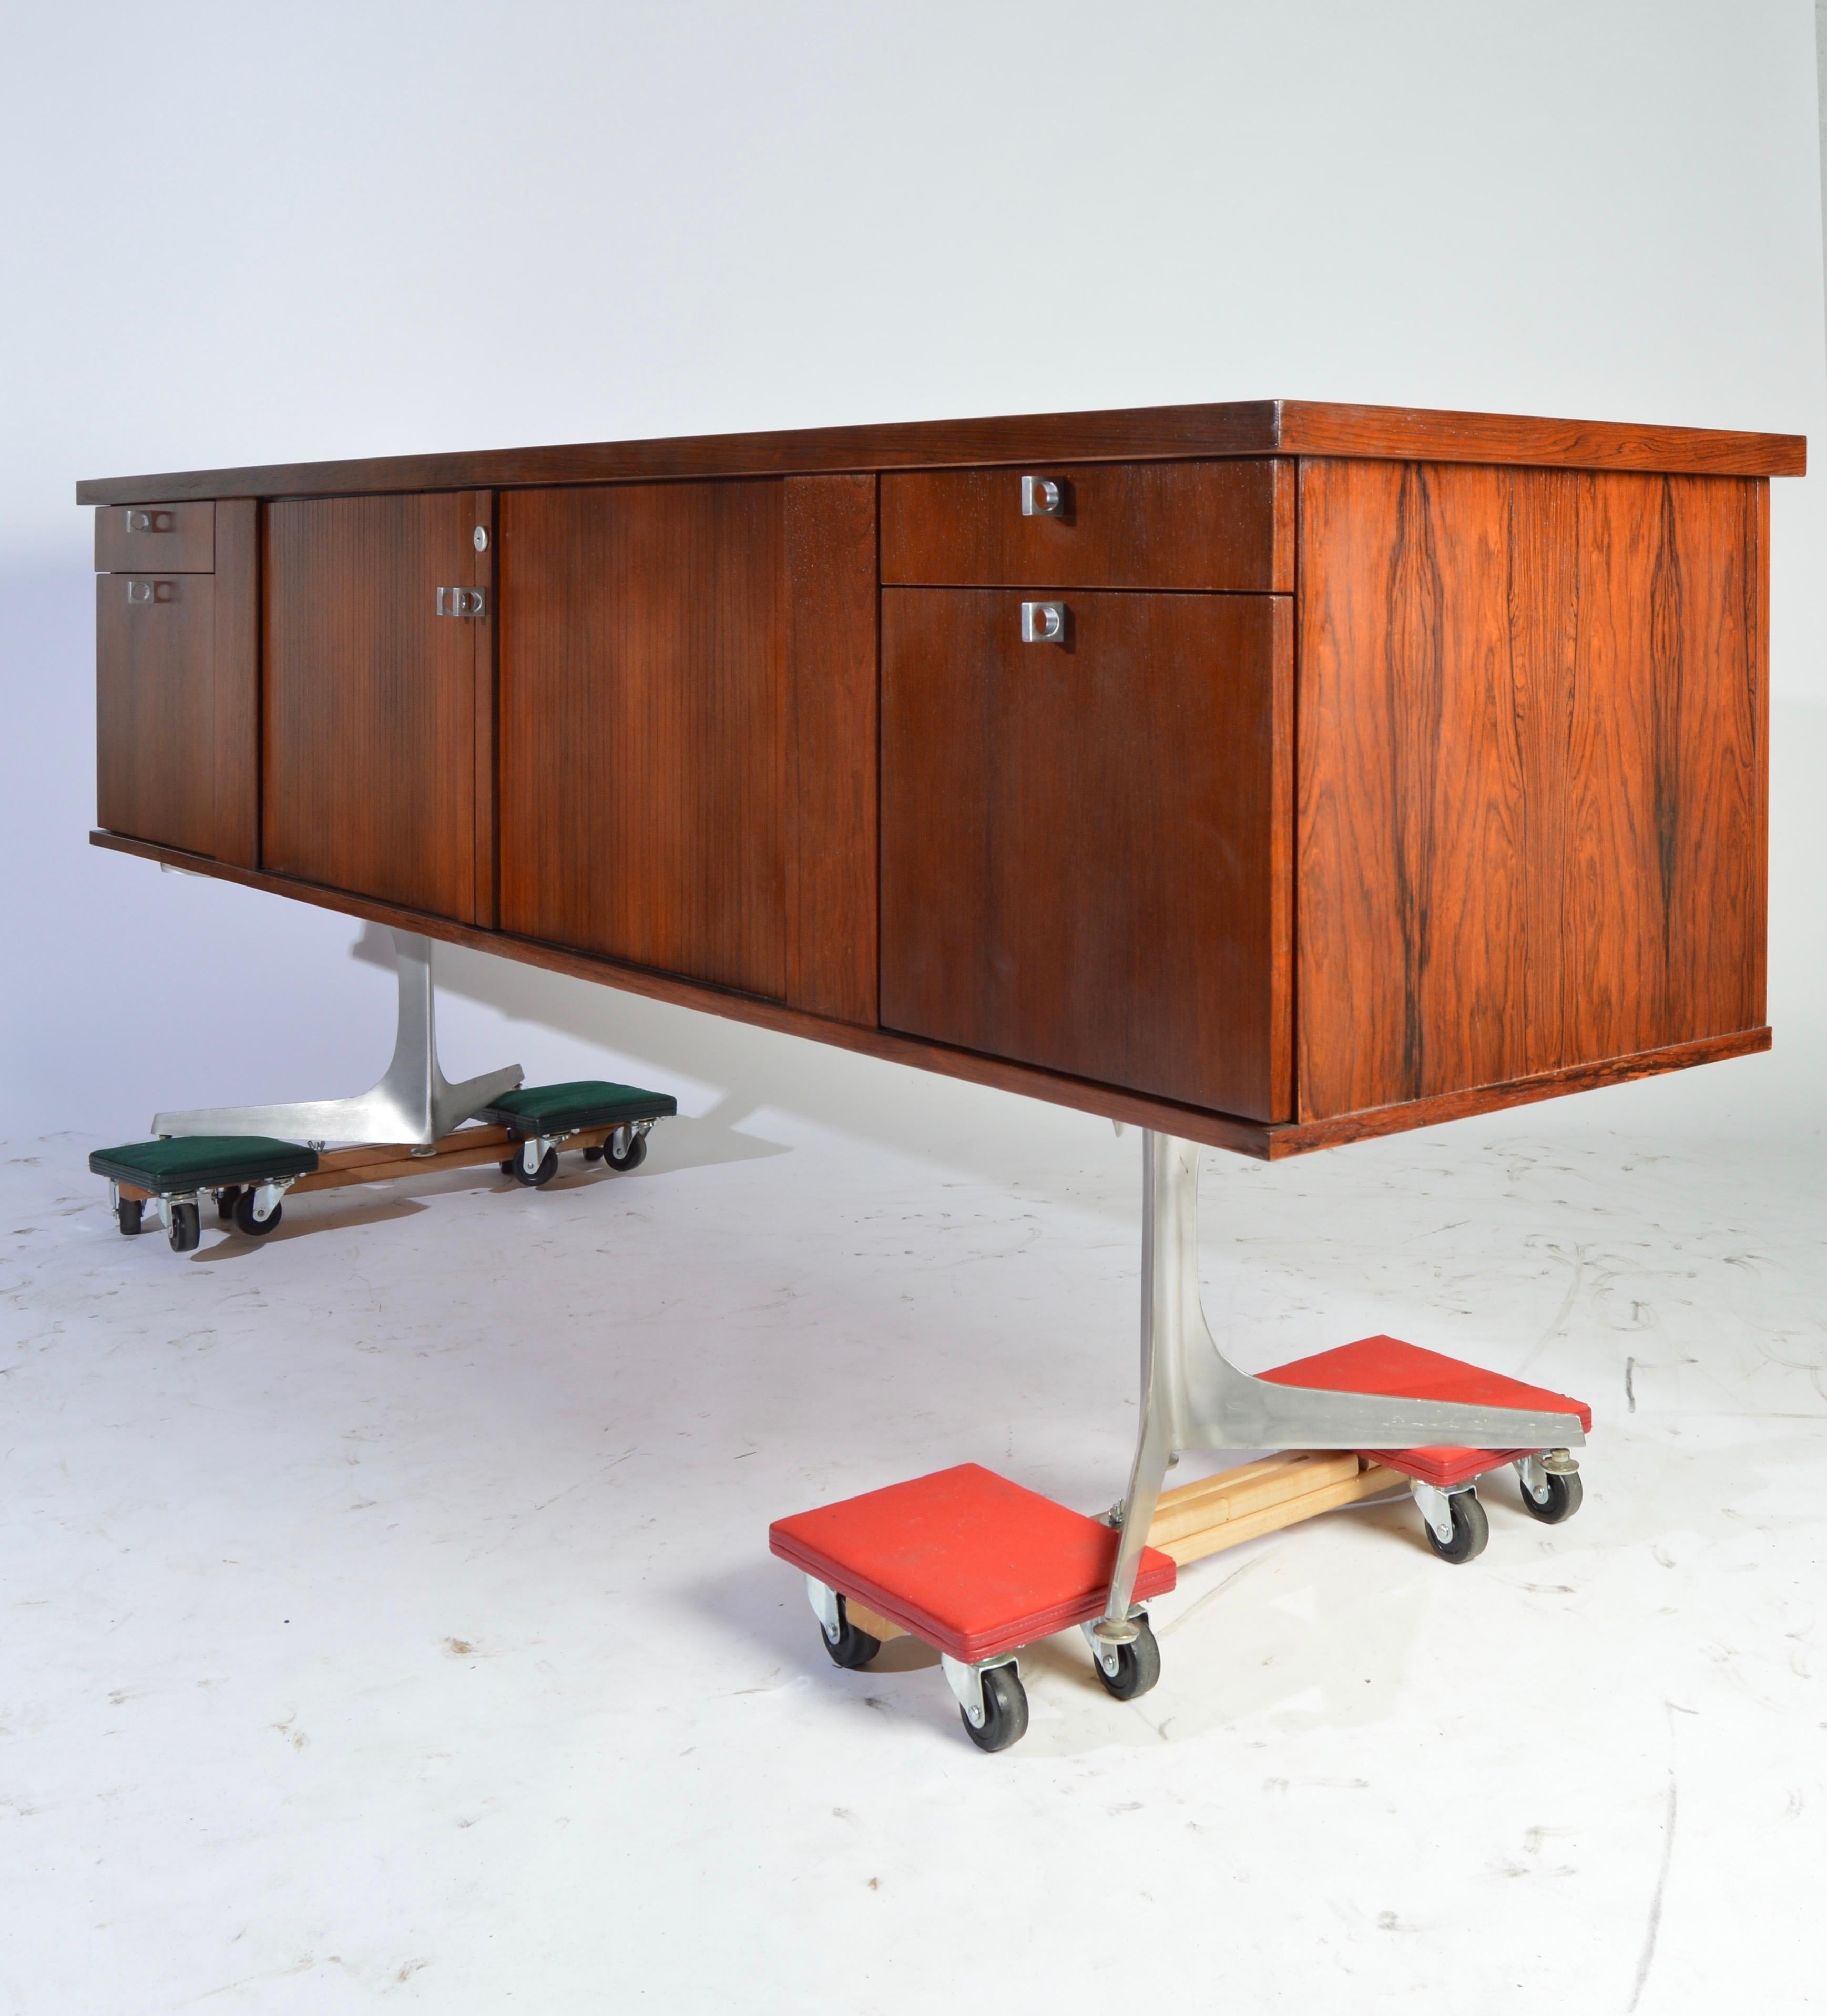 Herbert Hirche Minimalist ‘Top Series’ Rosewood Credenza having Tambour center doors that reveal ample case storage to the left and a wine or liquor rack to the right, which pulls out should you not need it.
The left and right sides of the case